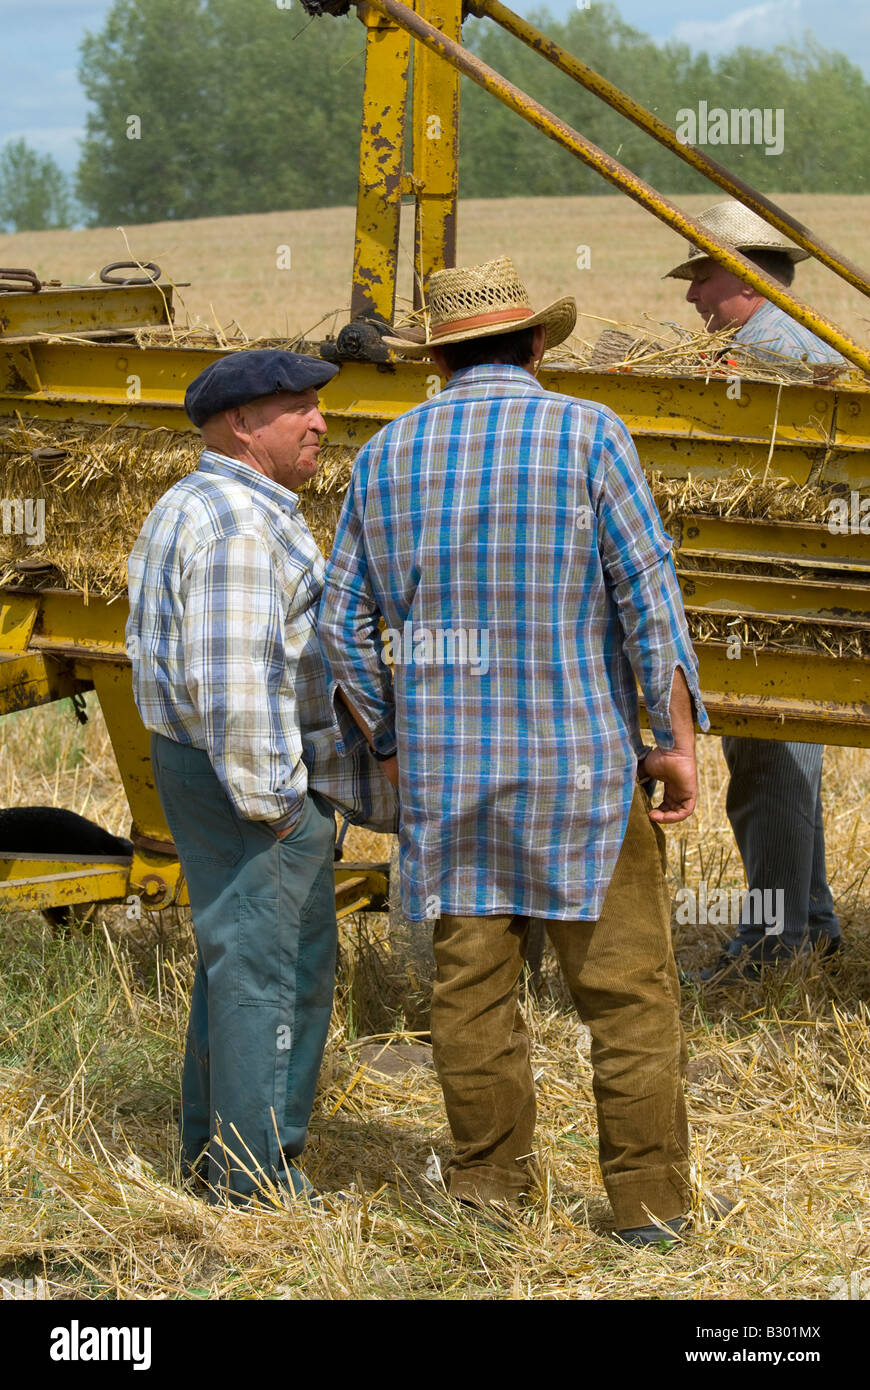 French farmers working on old straw baler machine at agricultural show, Indre, France. Stock Photo